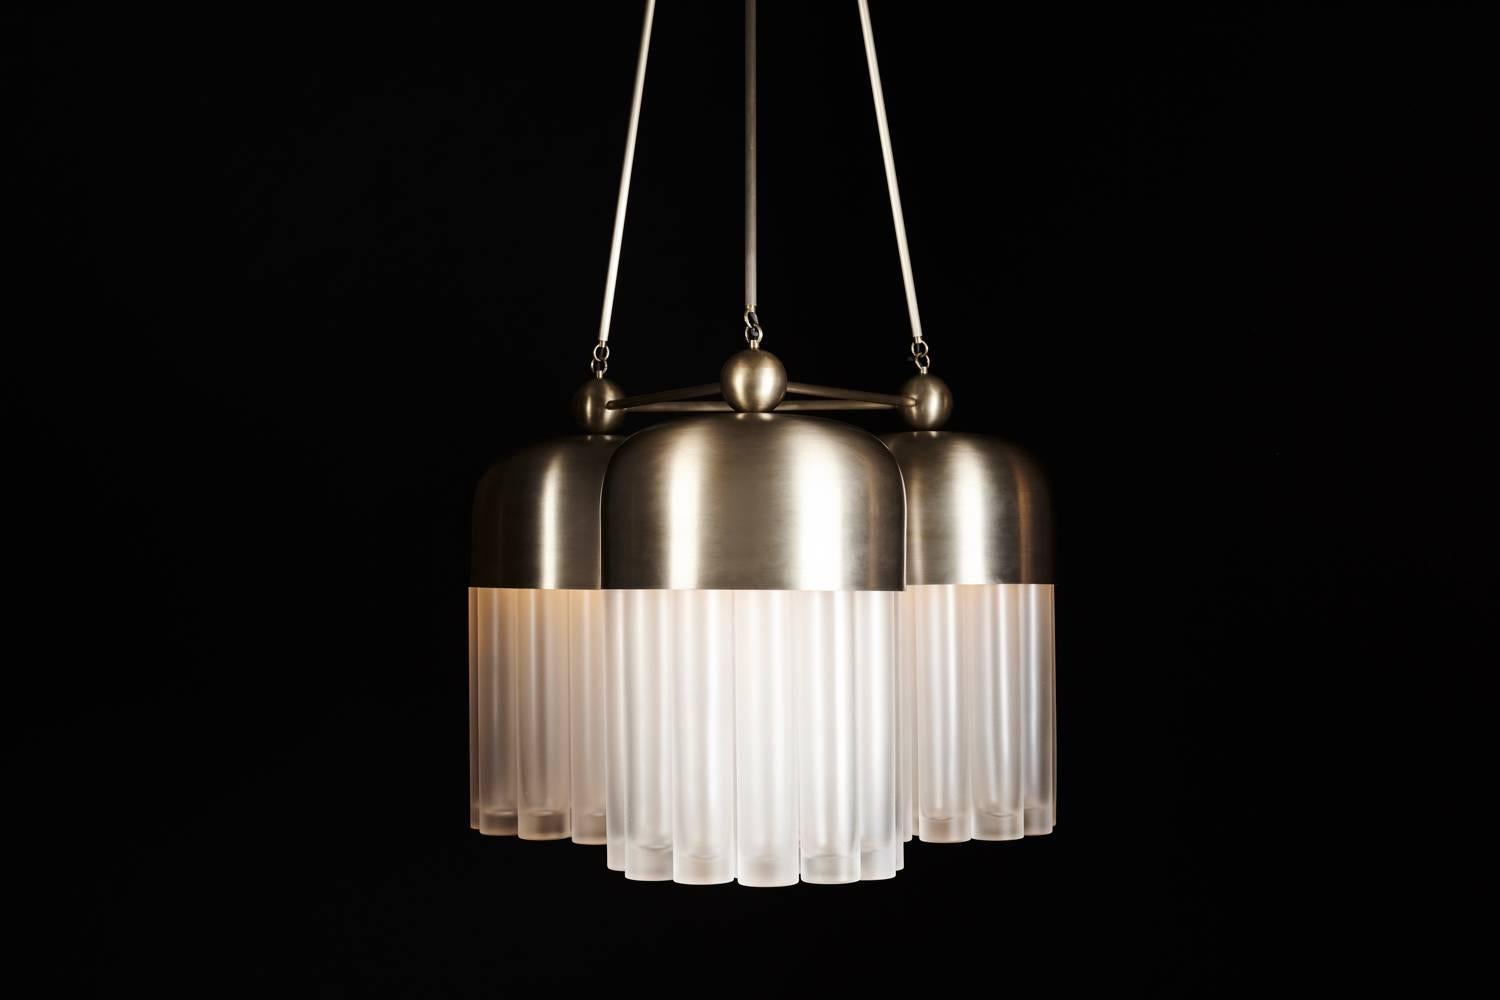 The Tassel series condenses the warmth and decadence of a traditional chandelier to a concise, modern conclusion. Emanating from a brass dome, the light is amplified as it refracts through mold-blown glass cylinders.
 